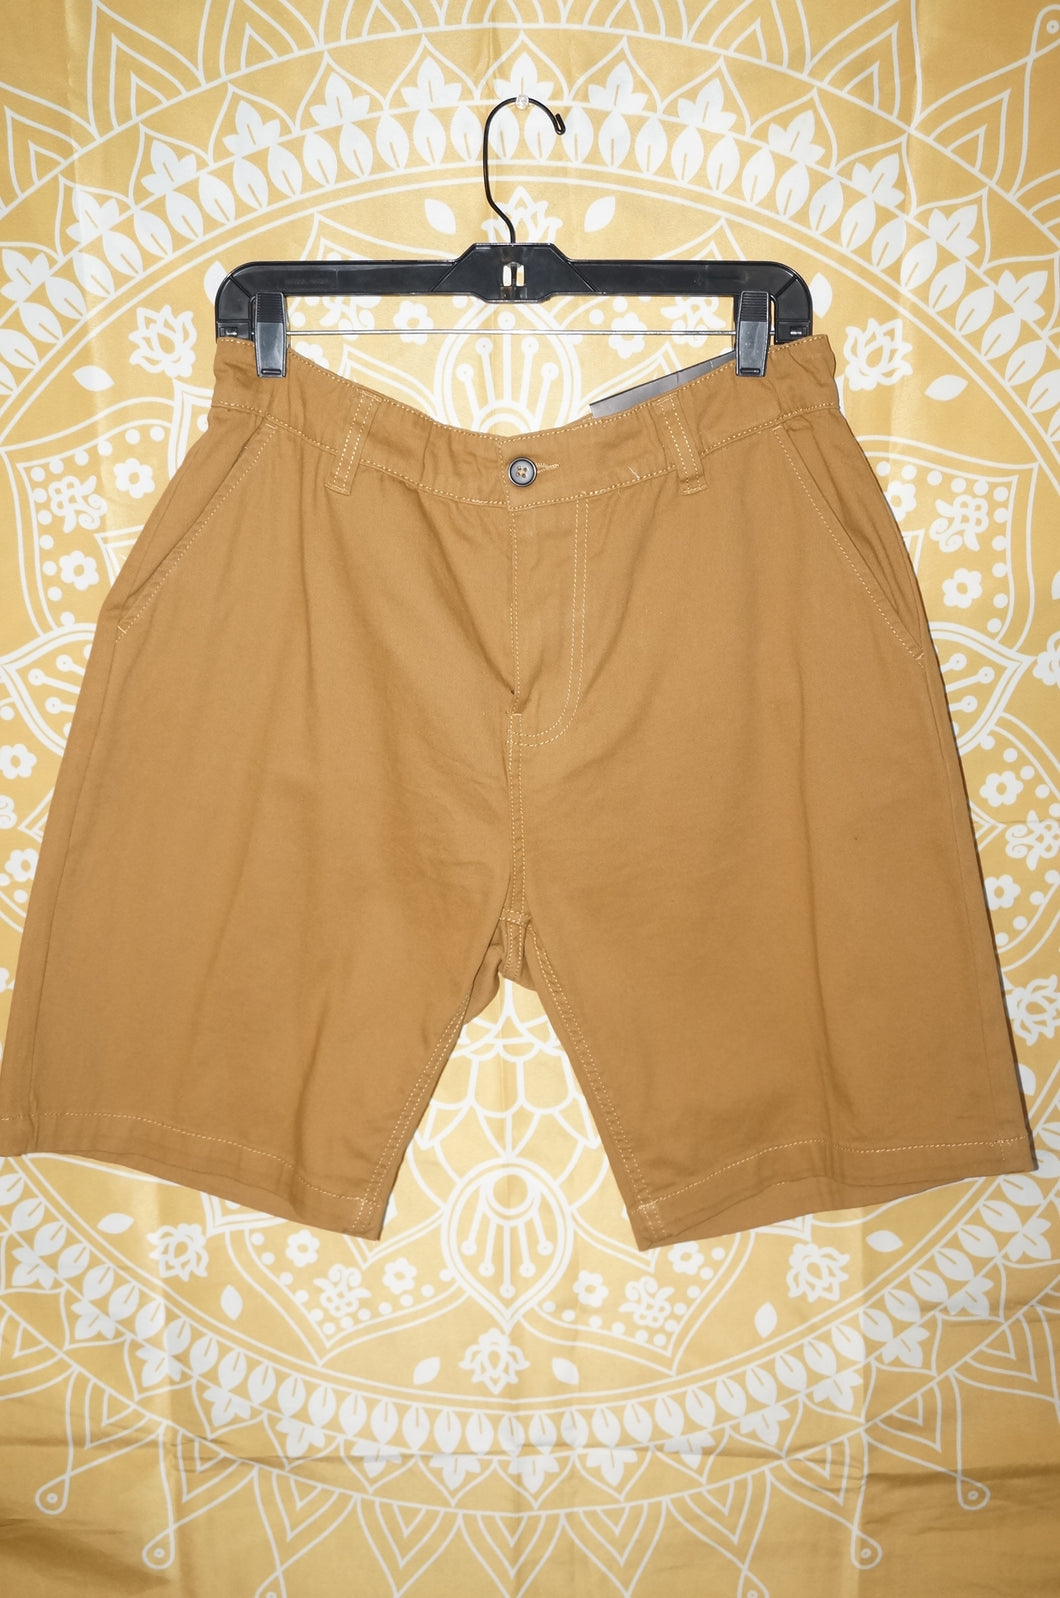 Mens Shorts Collection #1